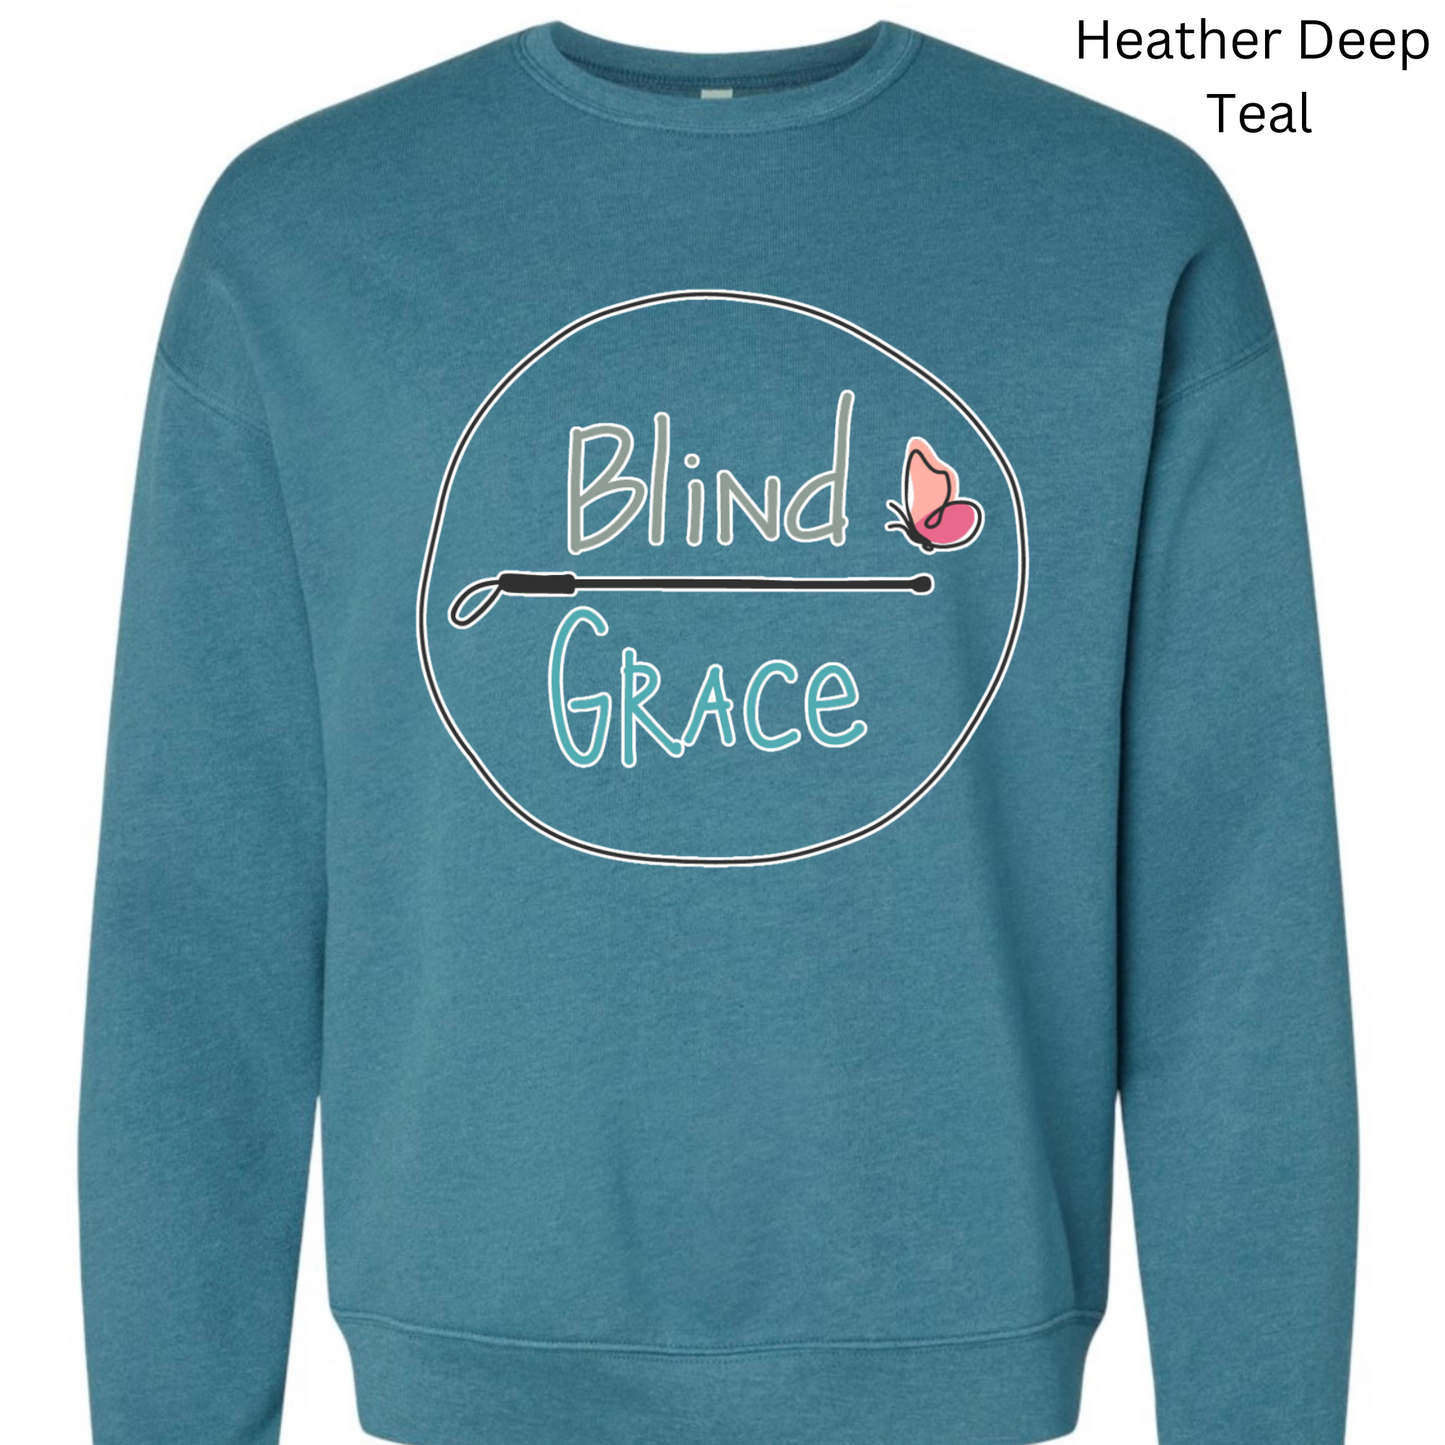 Heather deep teal crewneck sweatshirt with the original blind Grace logo (blind in olive green over a cane with Grace in turquoise and a pink and peach butterfly) outlined in white 